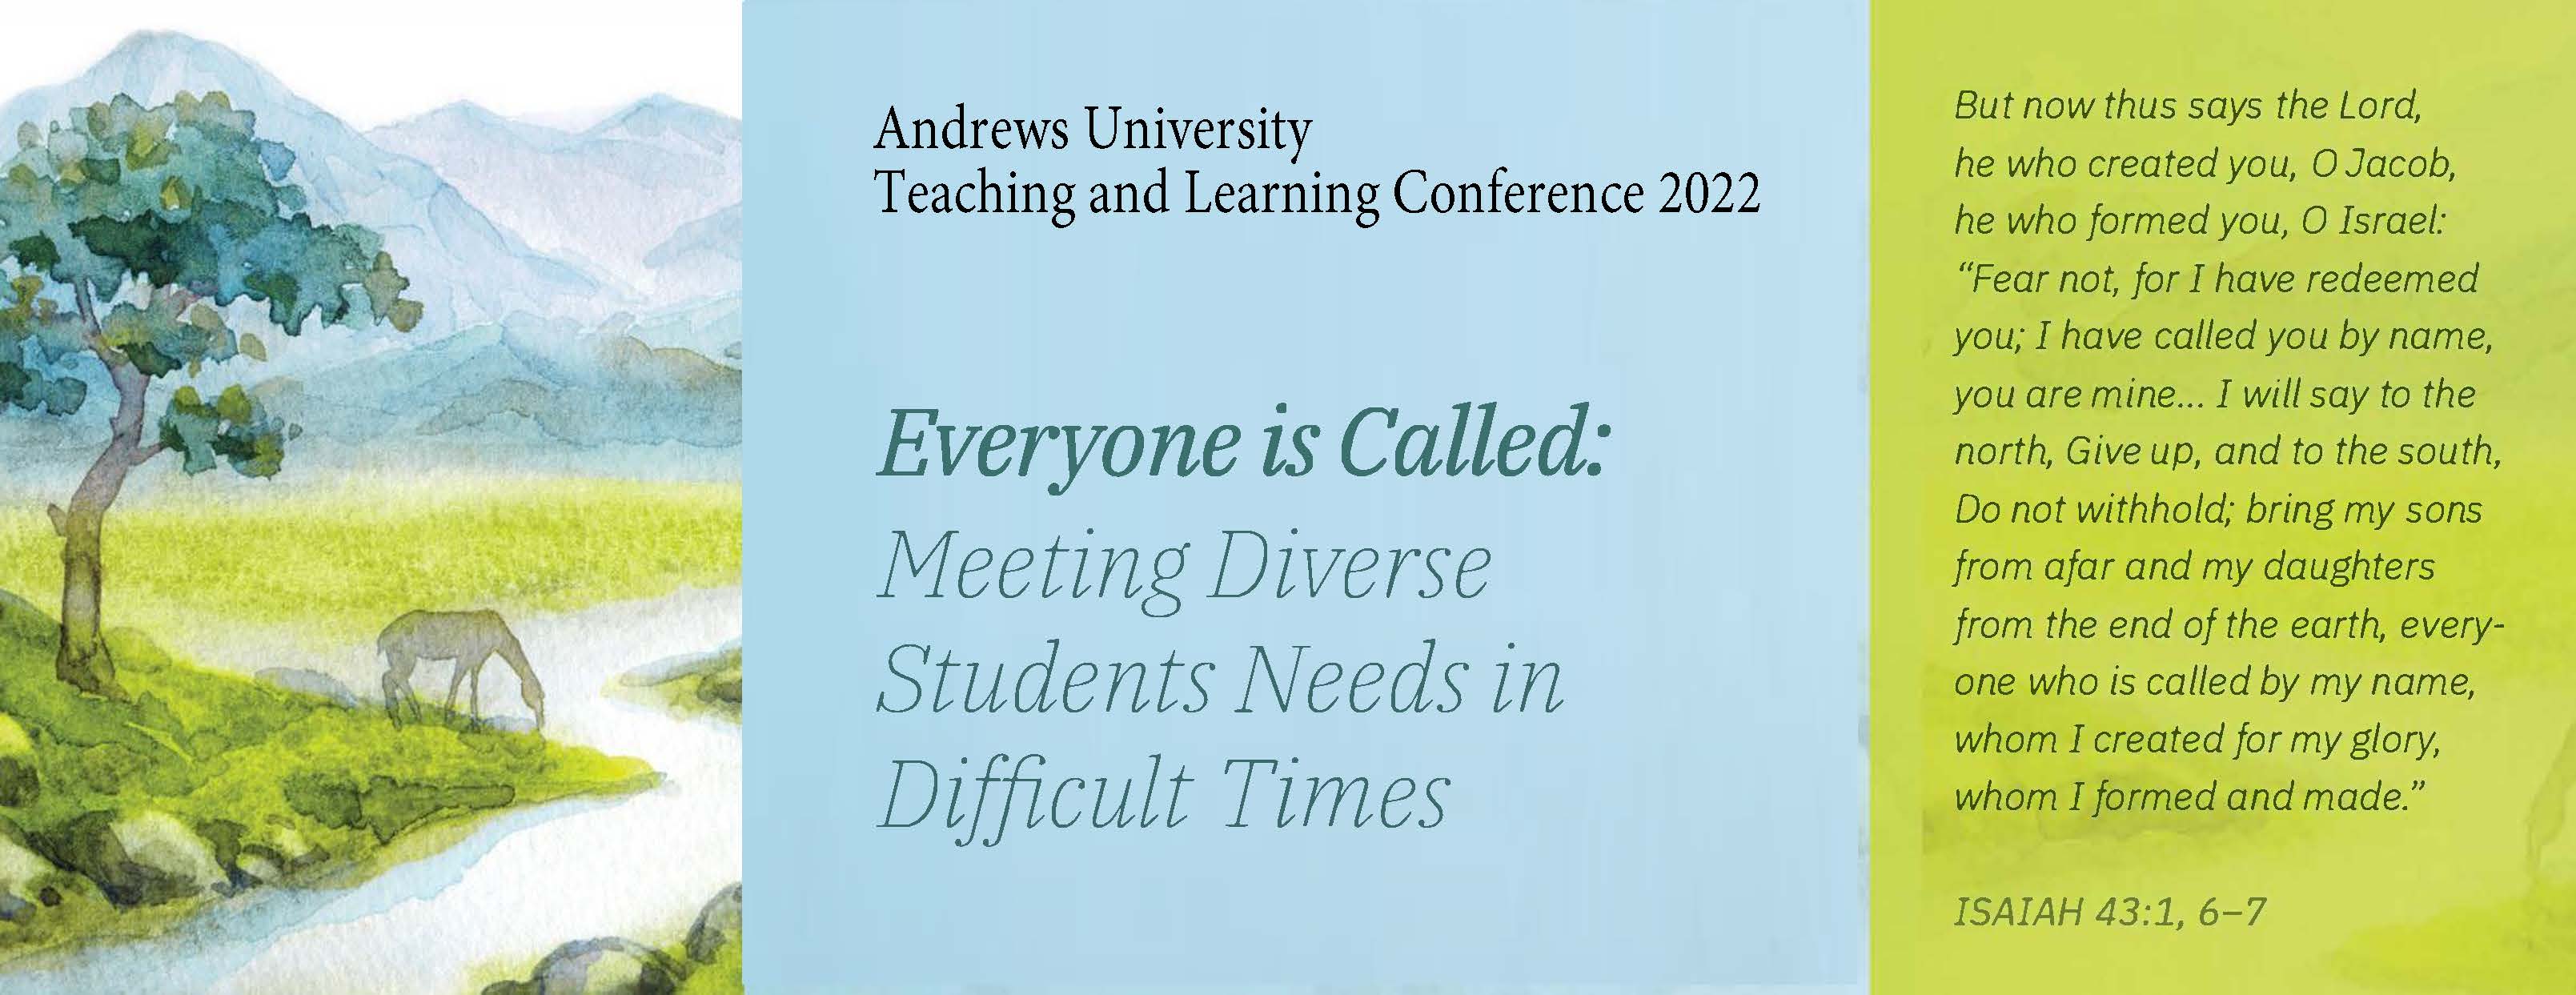 2022 Andrews University Teaching and Learning Conference